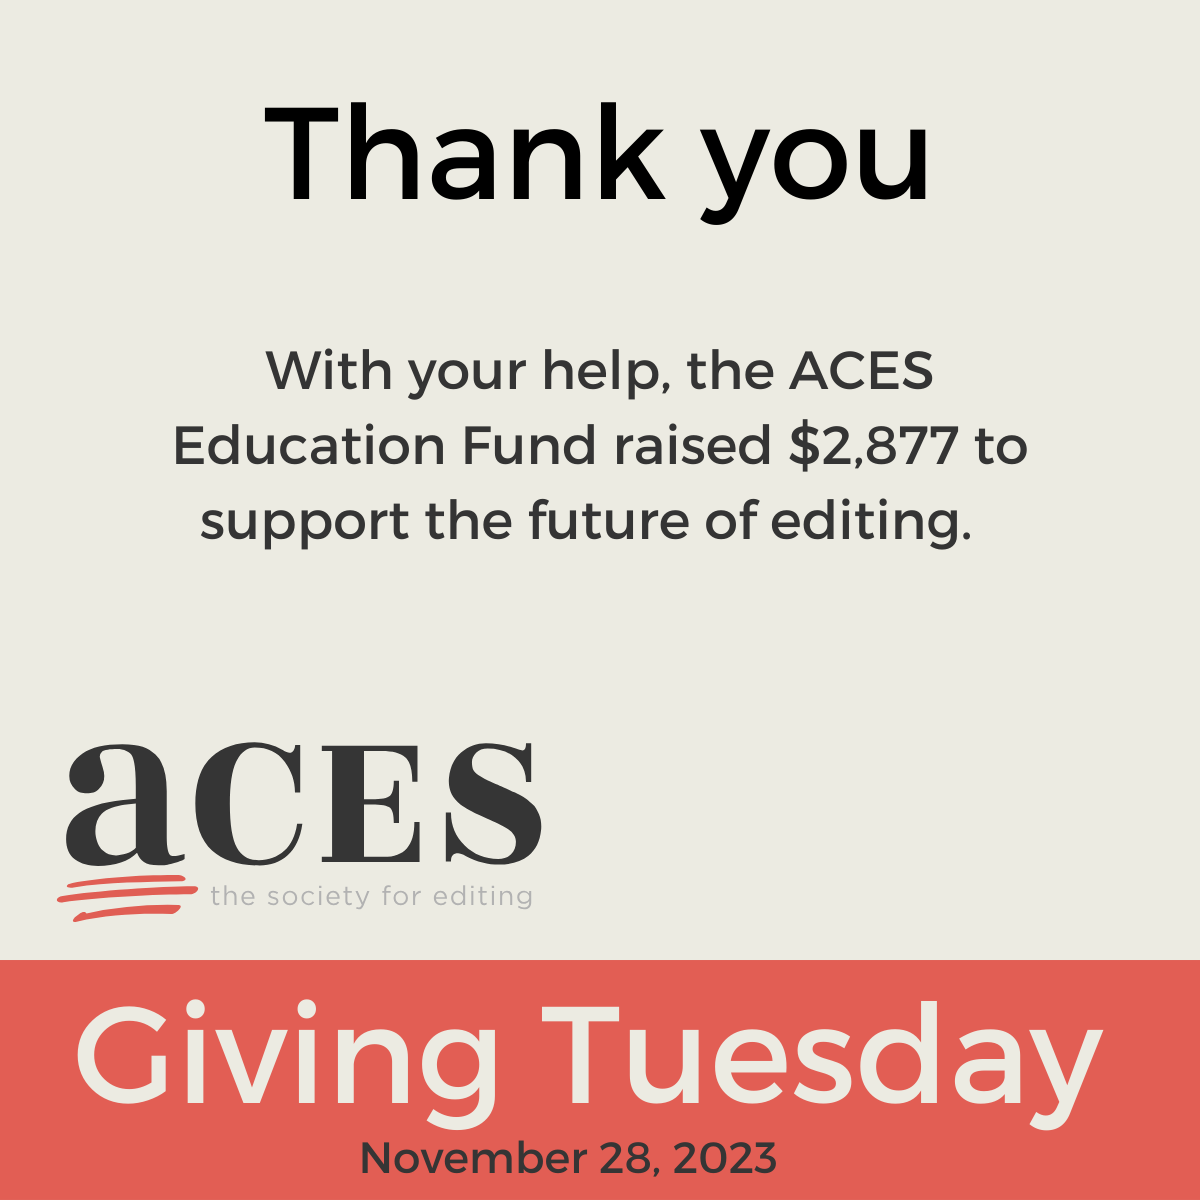 Thanks to you, the ACES Education Fund raised nearly $3,000 in GivingTuesday donations